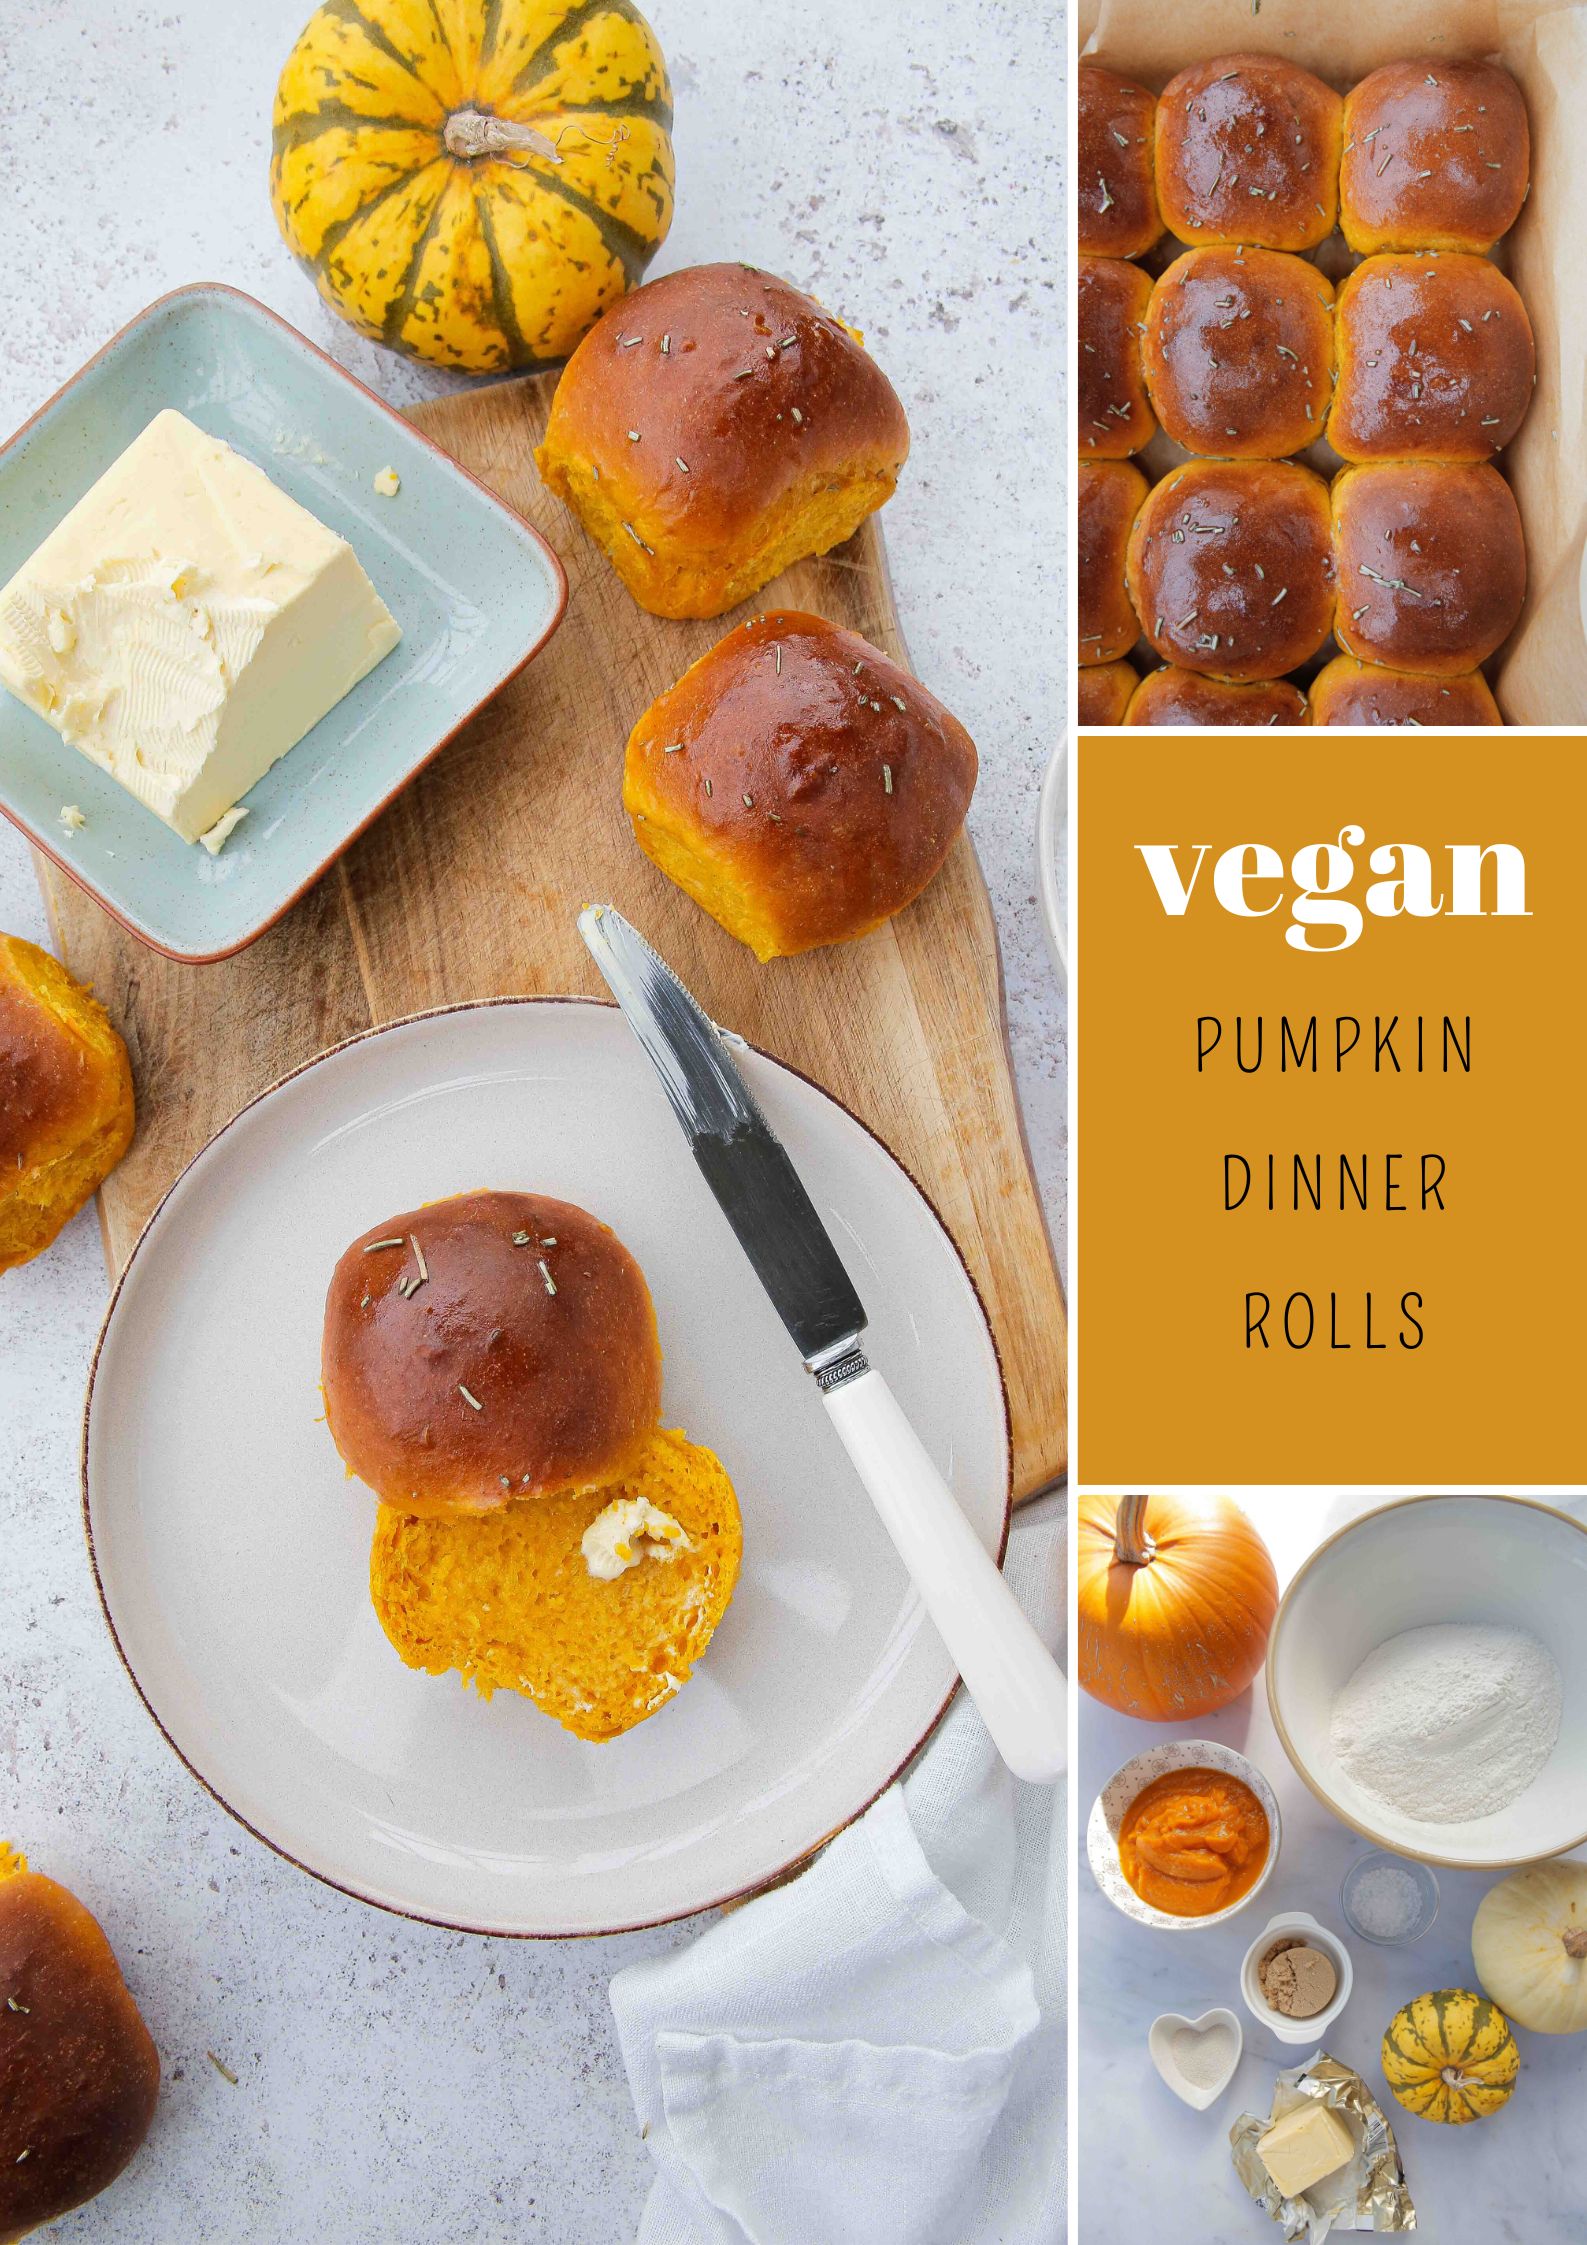 Light, fluffy, buttery homemade pumpkin dinner rolls with a sea salt and rosemary butter glaze. Perfect for pairing with autumn soups or a Thanksgiving feast! Recipe on thecookandhim.com | #thanksgiving #thanksgivingrecipes #pumpkin #pumpkinbread #pumpkindinnerrolls #autumnrecipes #fallrecipes #yeastrollsrecipe #pumpkinpuree